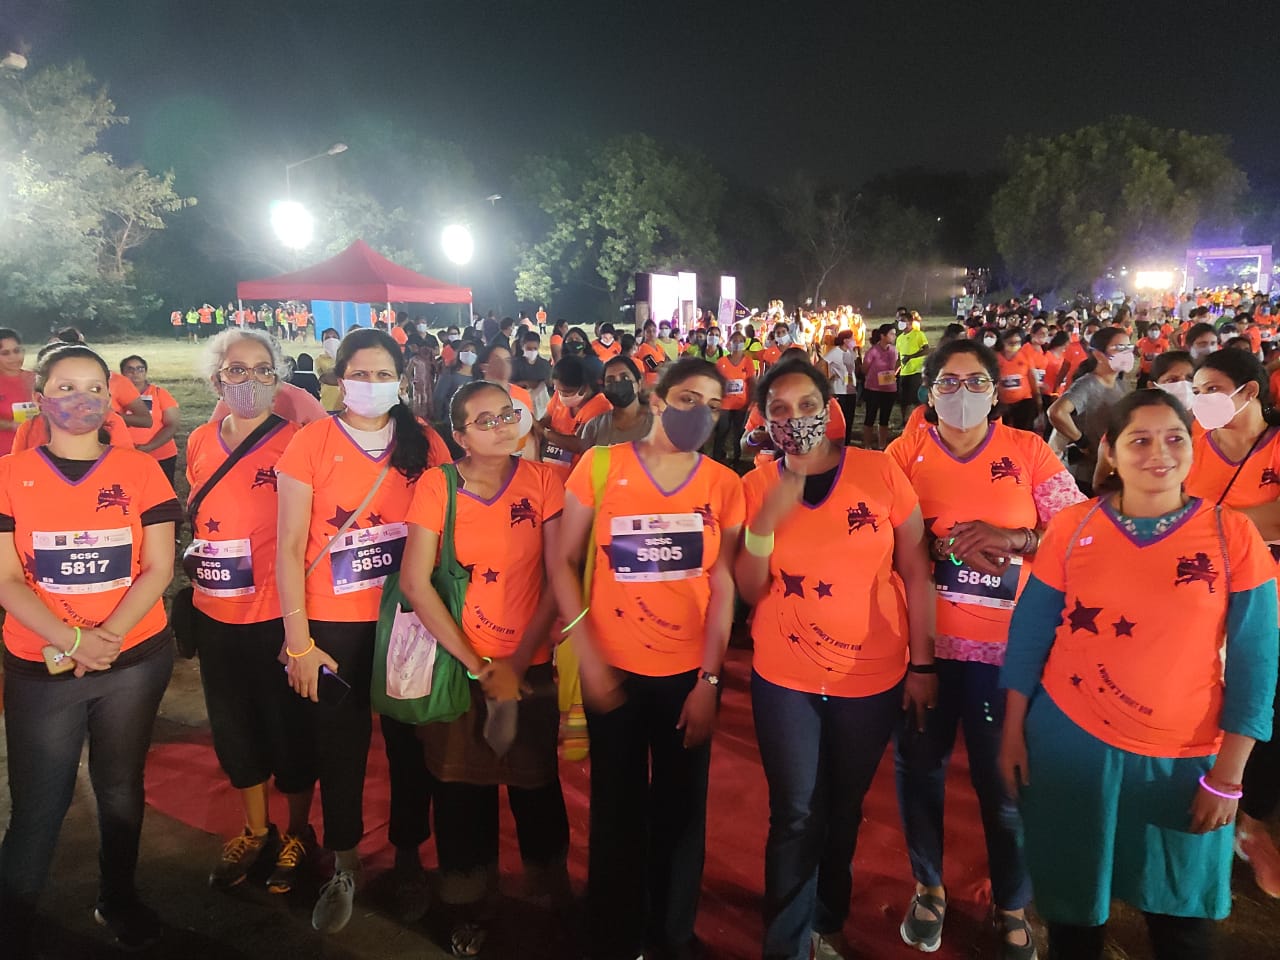 Women’s Night Run For Safety and Empowerment of Women held